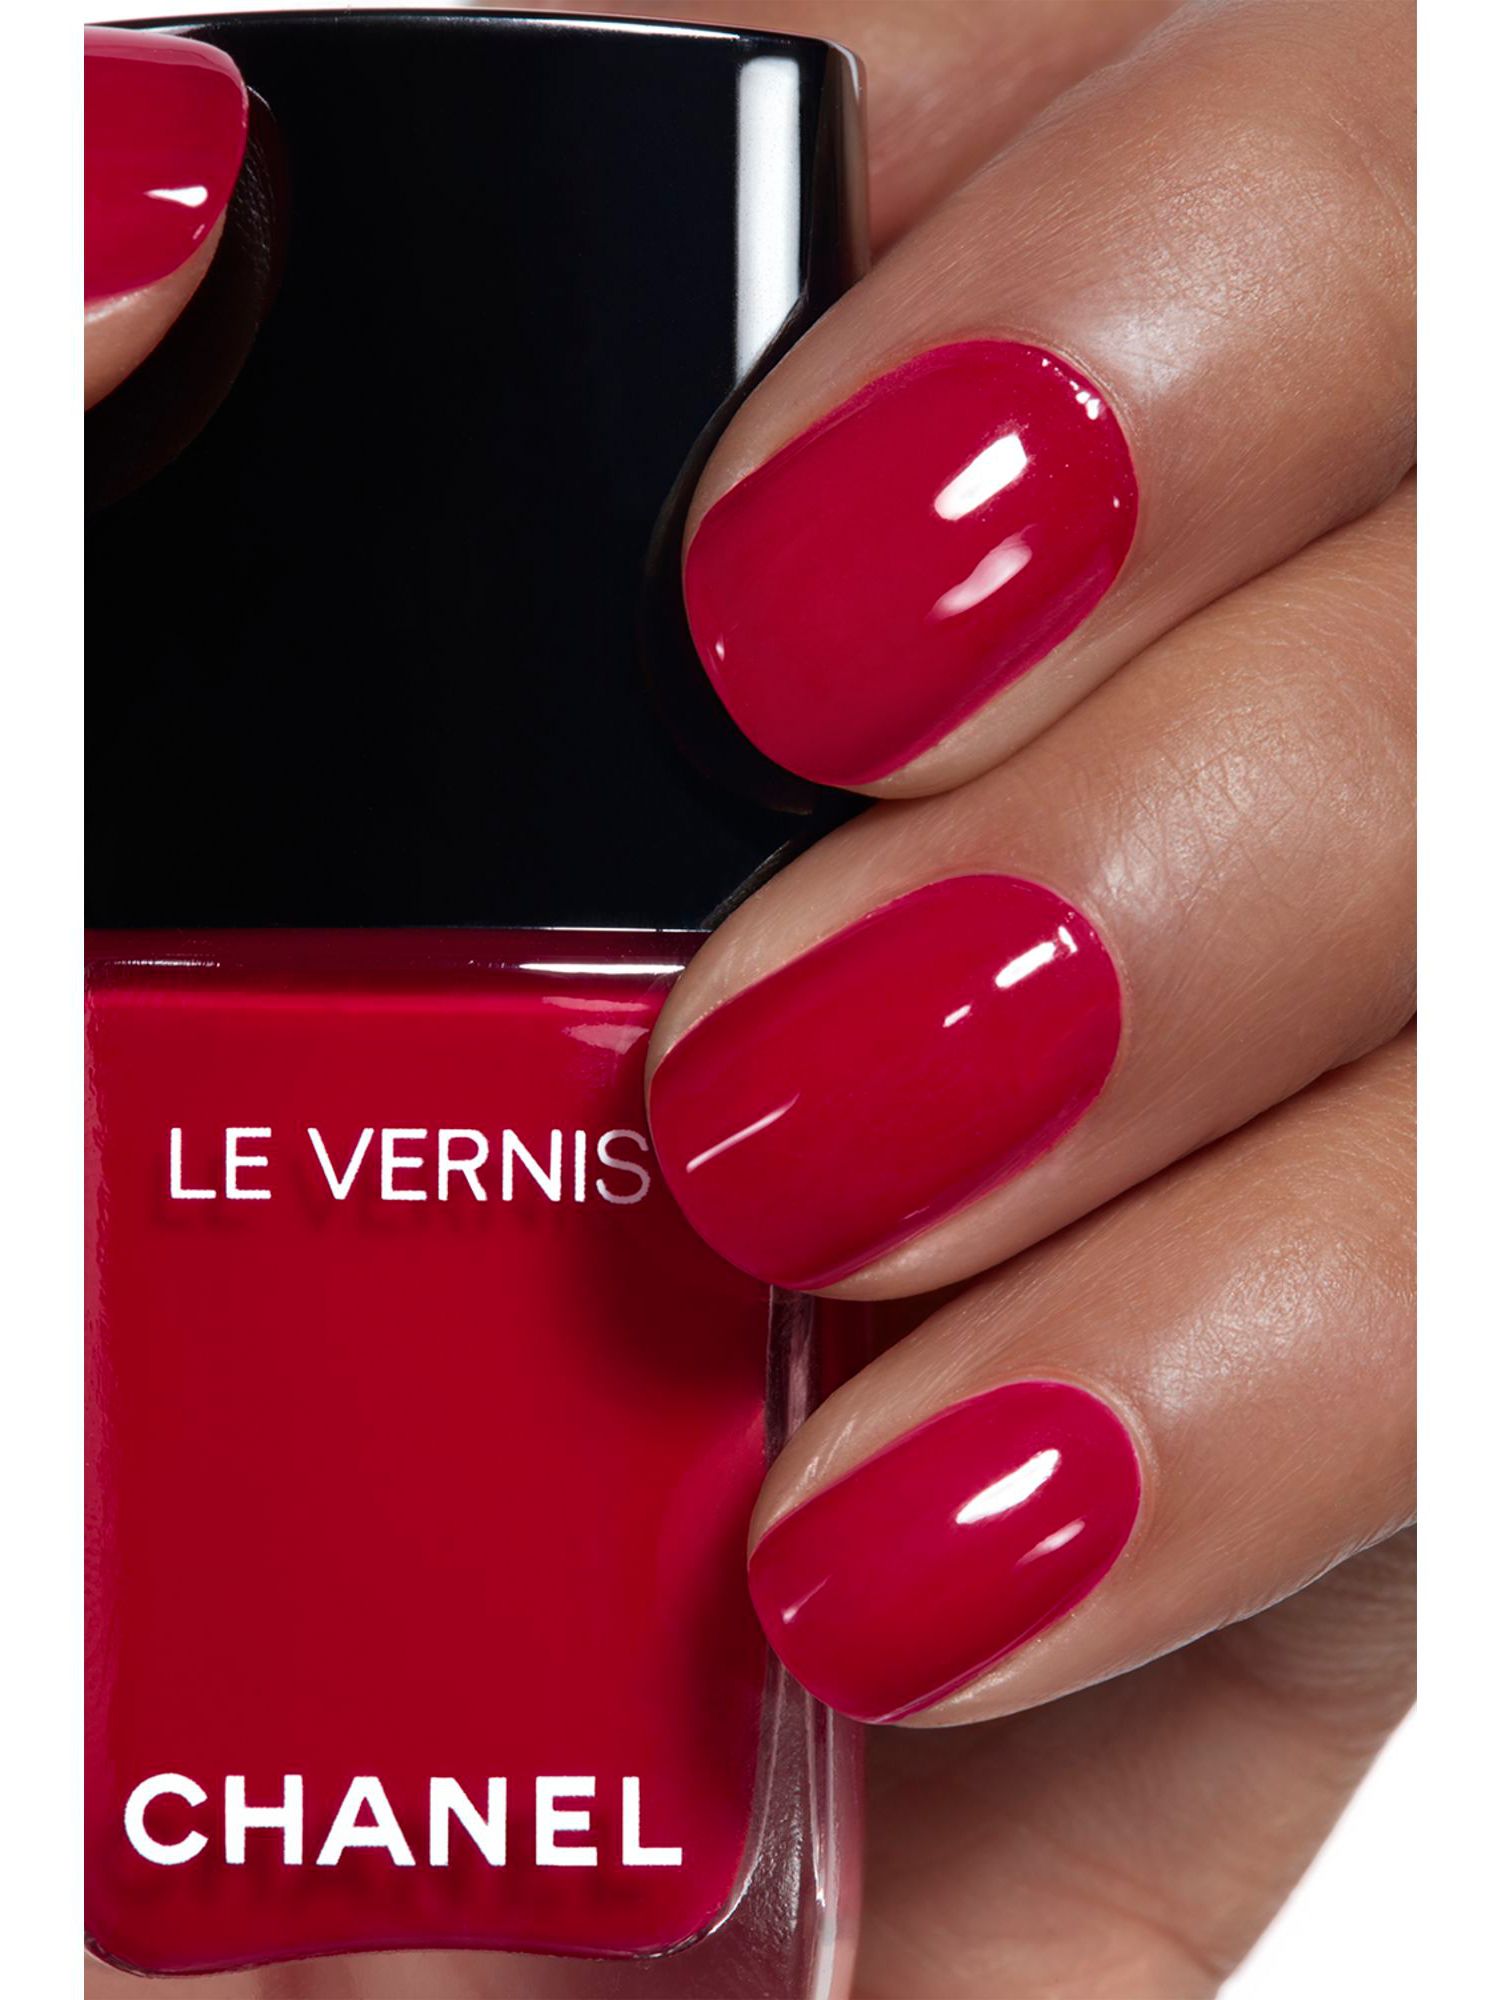 CHANEL Le Vernis Lewis Pirate at Nail Colour, & 151 John Partners